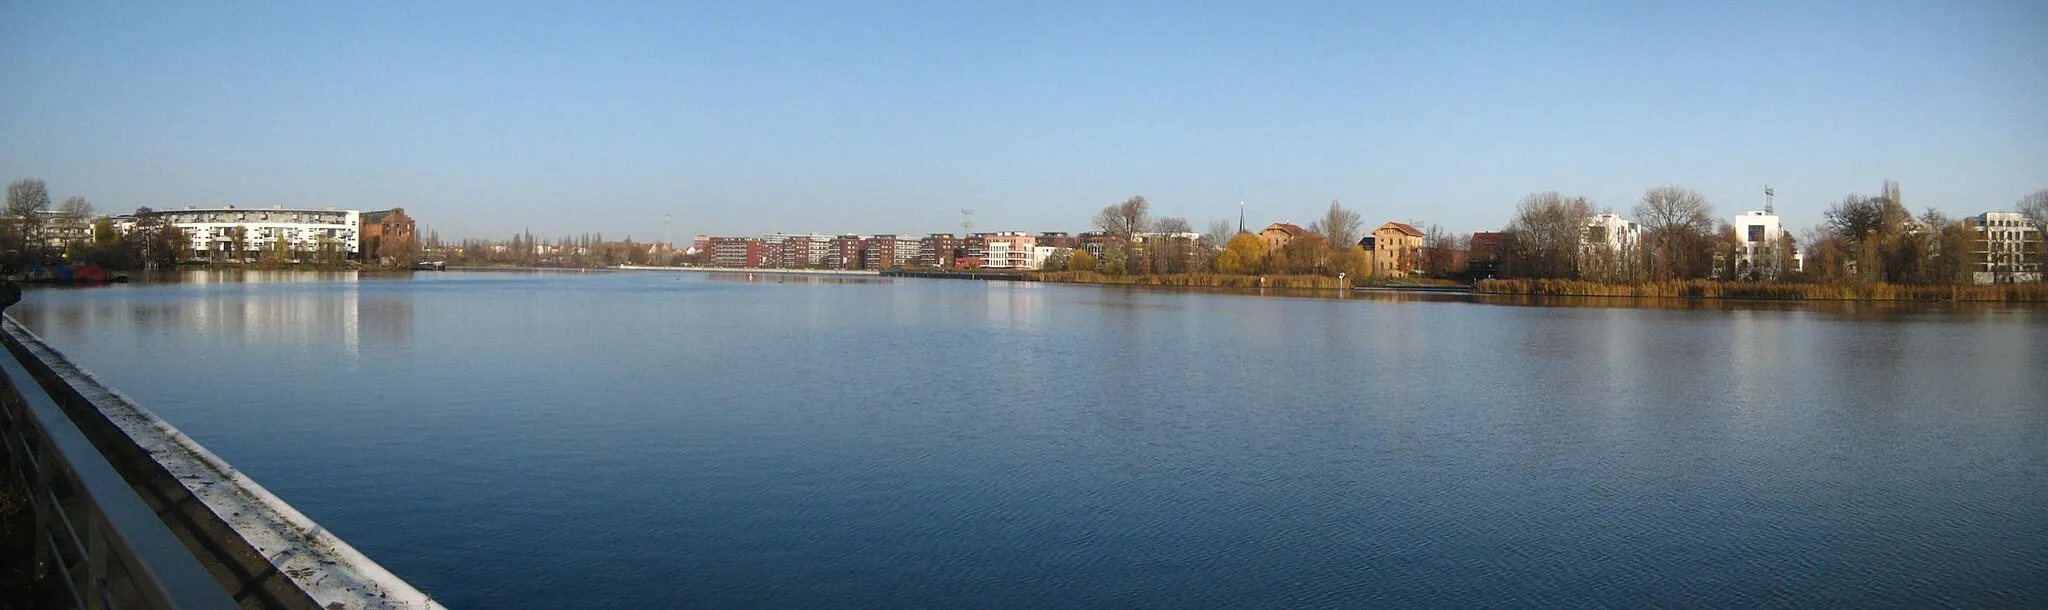 Photo showing: Panoramic view of the Rummelsburg Lake in Berlin between the Stralau Peninsula in the borough of Friedrichshain (left) and the borough of Rummelsburg (right). The water area spreads about 40 hectares and is a bay of the River Spree.